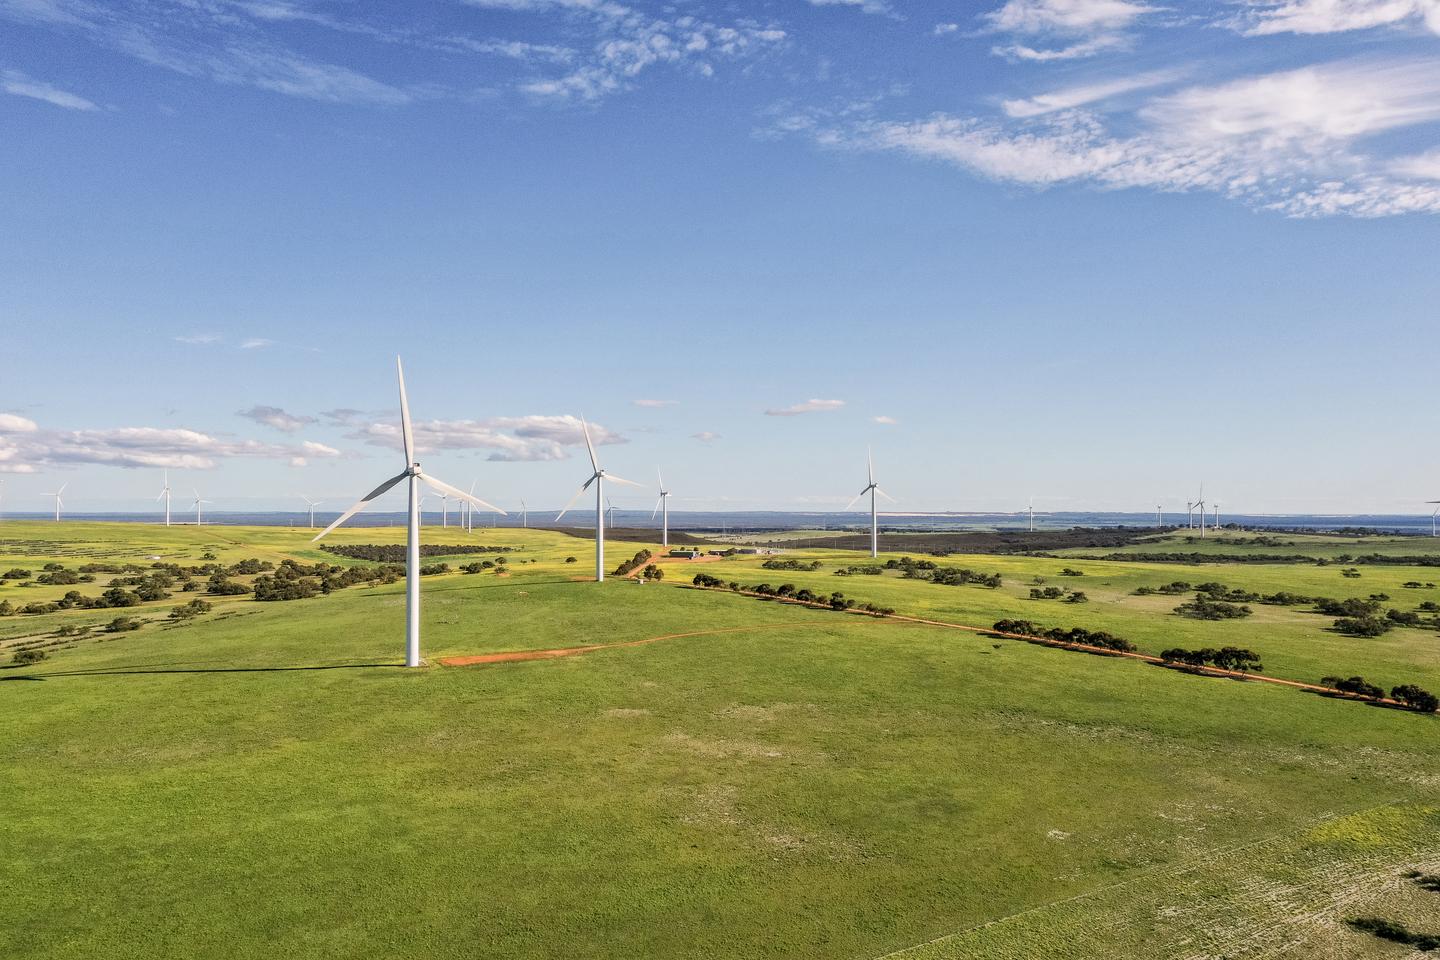 Wind farm slugged $1m over blackout issues